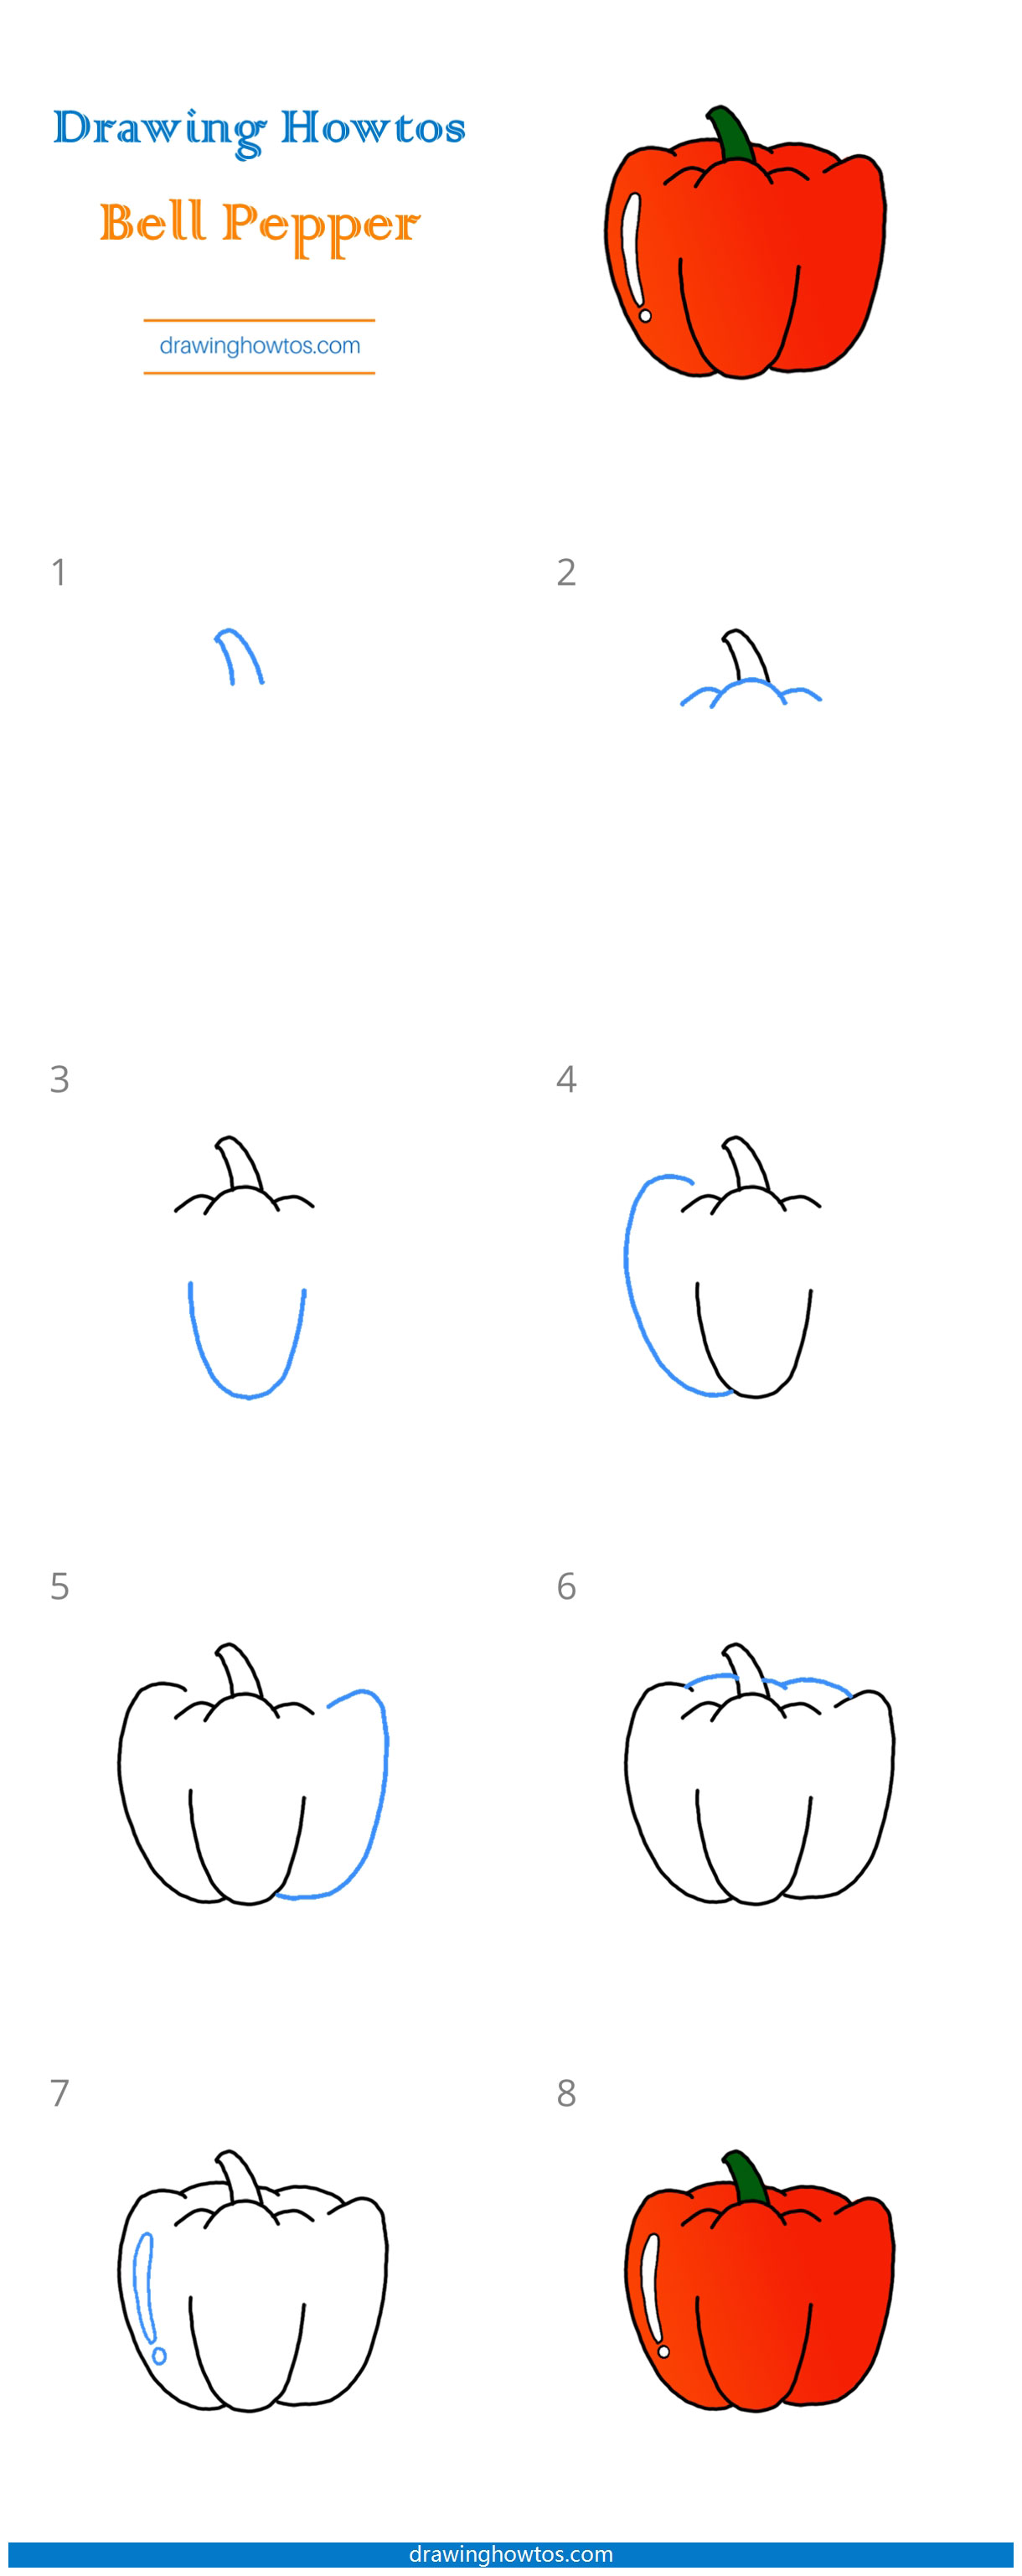 How to Draw a Bell Pepper Step by Step Easy Drawing Guides Drawing